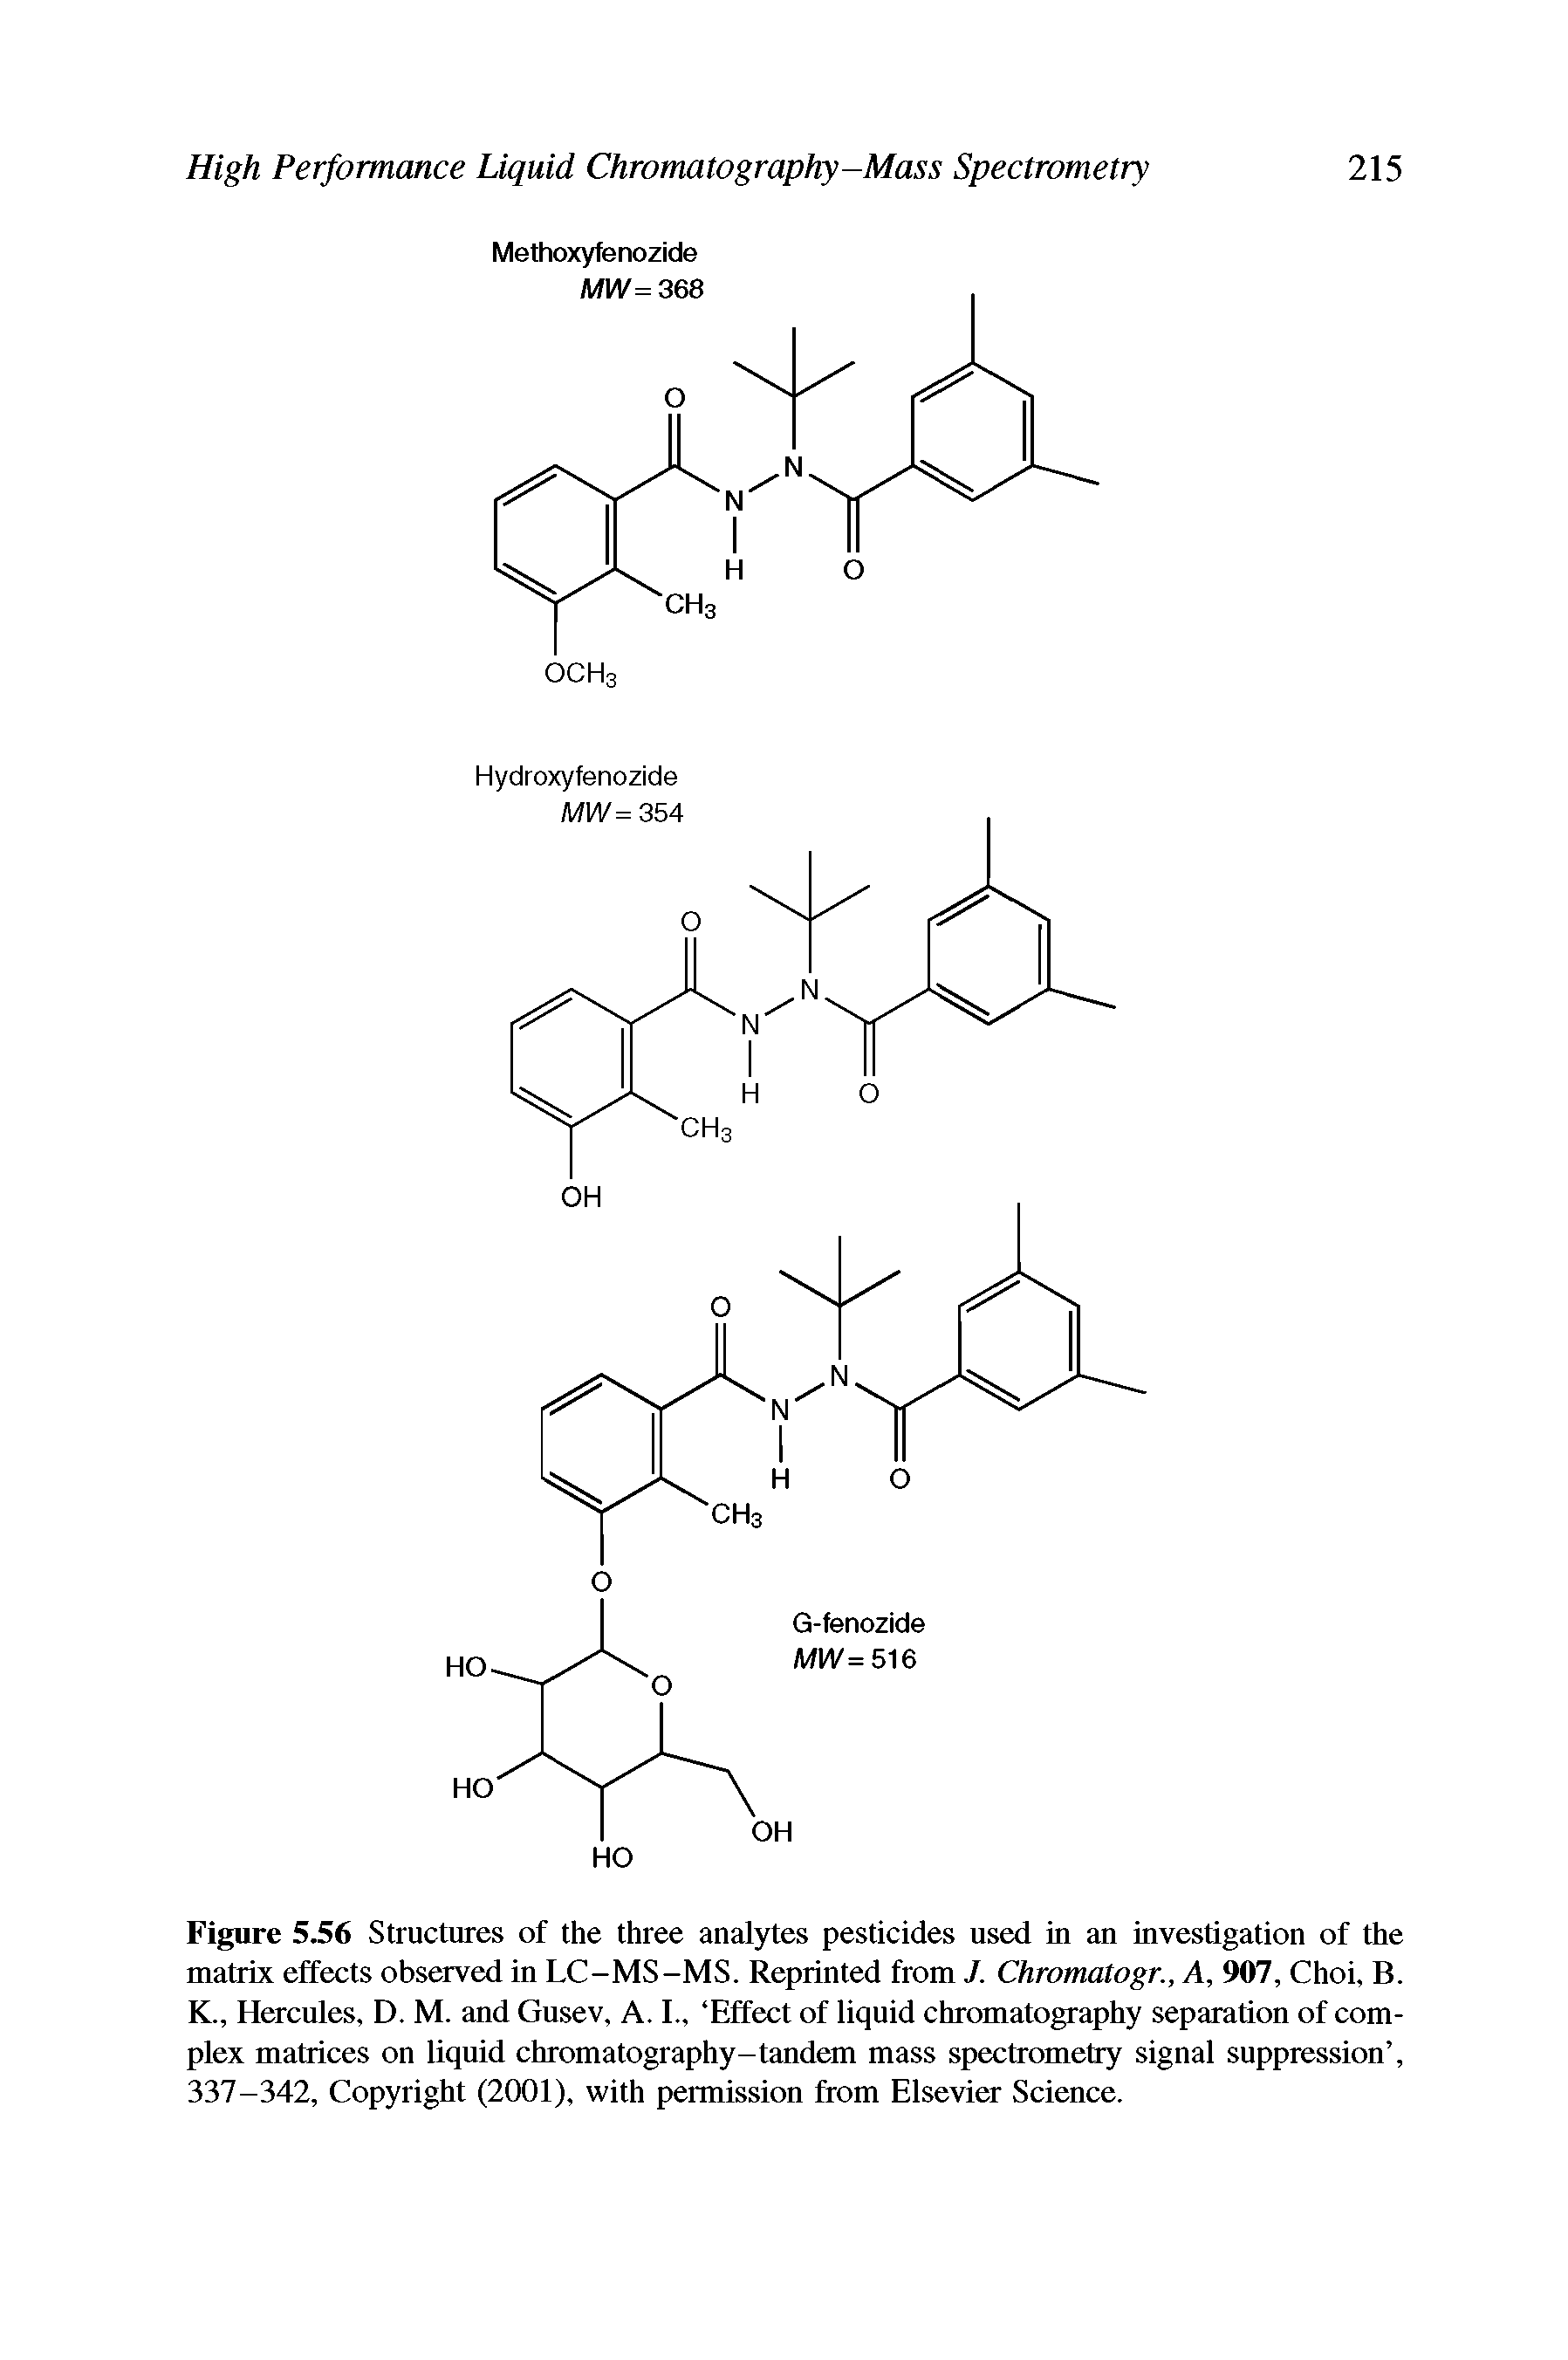 Figure 5.56 Structures of the three analytes pesticides used in an investigation of the matrix effects observed in LC-MS-MS. Reprinted from J. Chromatogr., A, 907, Choi, B. K., Hercnles, D. M. and Gnsev, A. I., Effect of liquid chromatography separation of complex matrices on liqnid chromatography-tandem mass spectrometry signal suppression , 337-342, Copyright (2001), with permission from Elsevier Science.